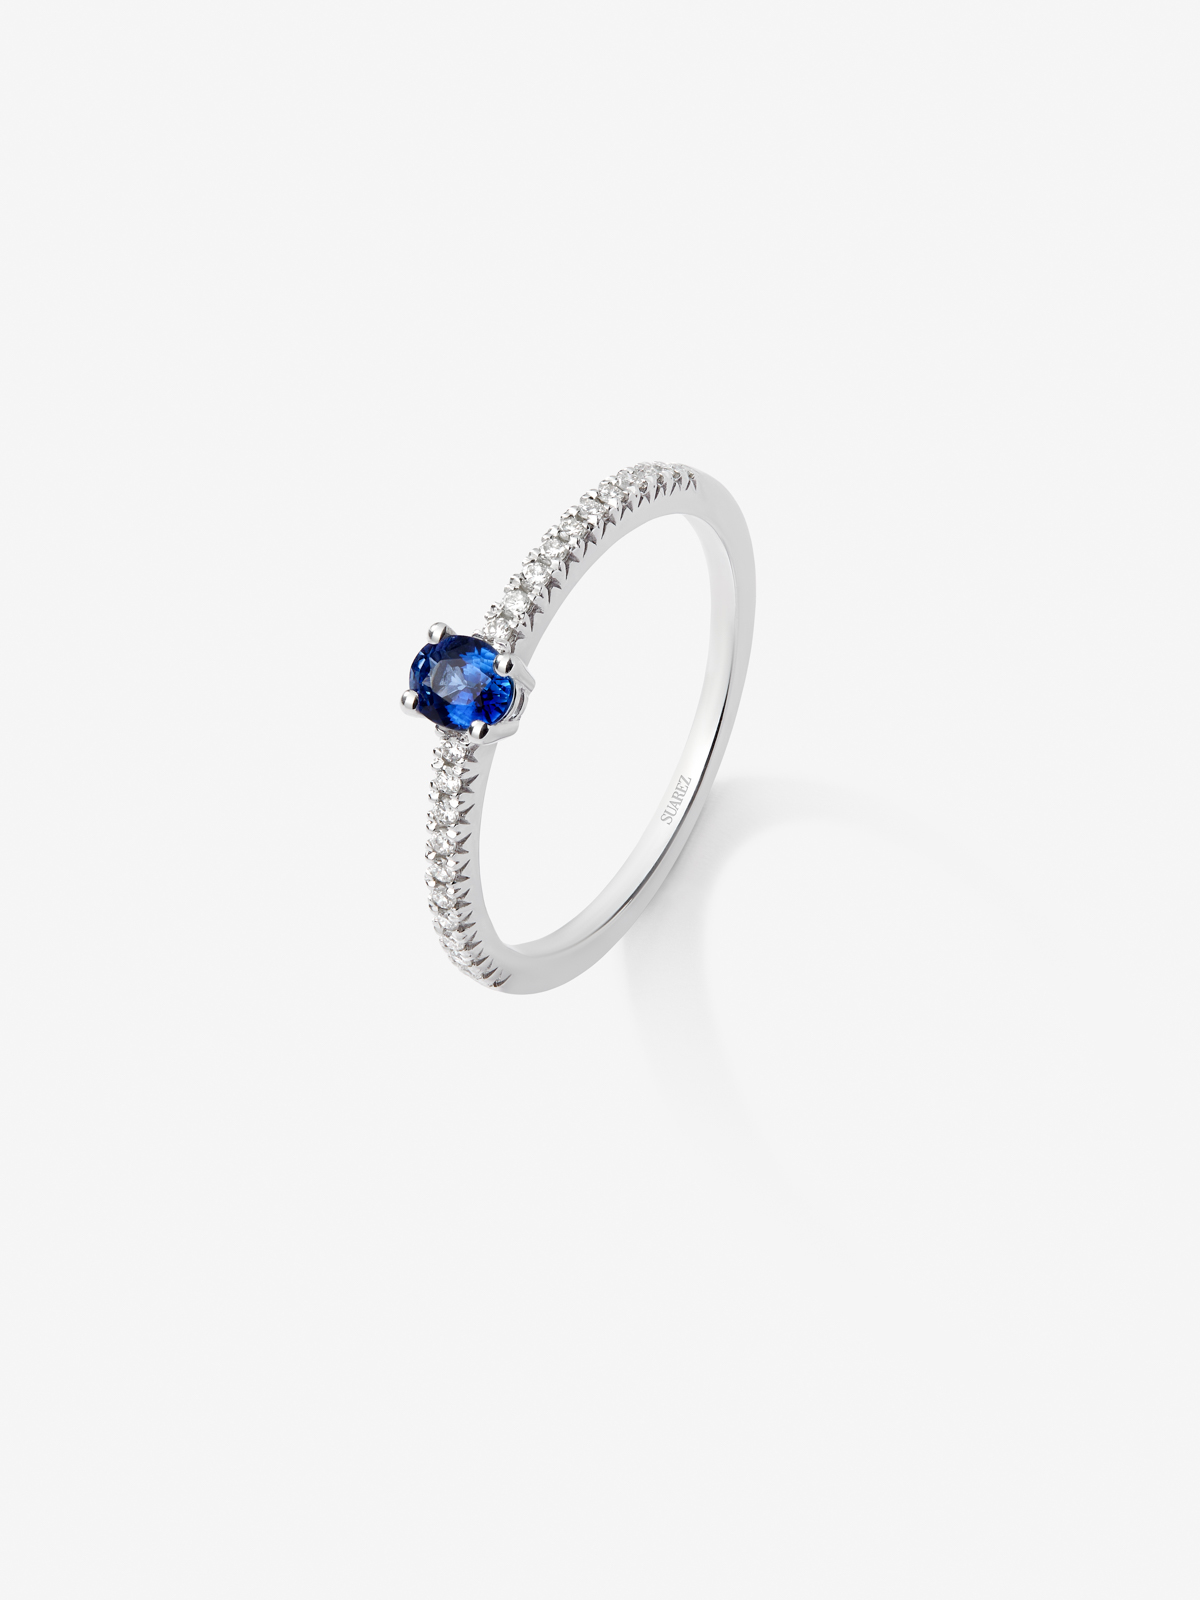 18K White Gold Ring with Azul Blue Saber